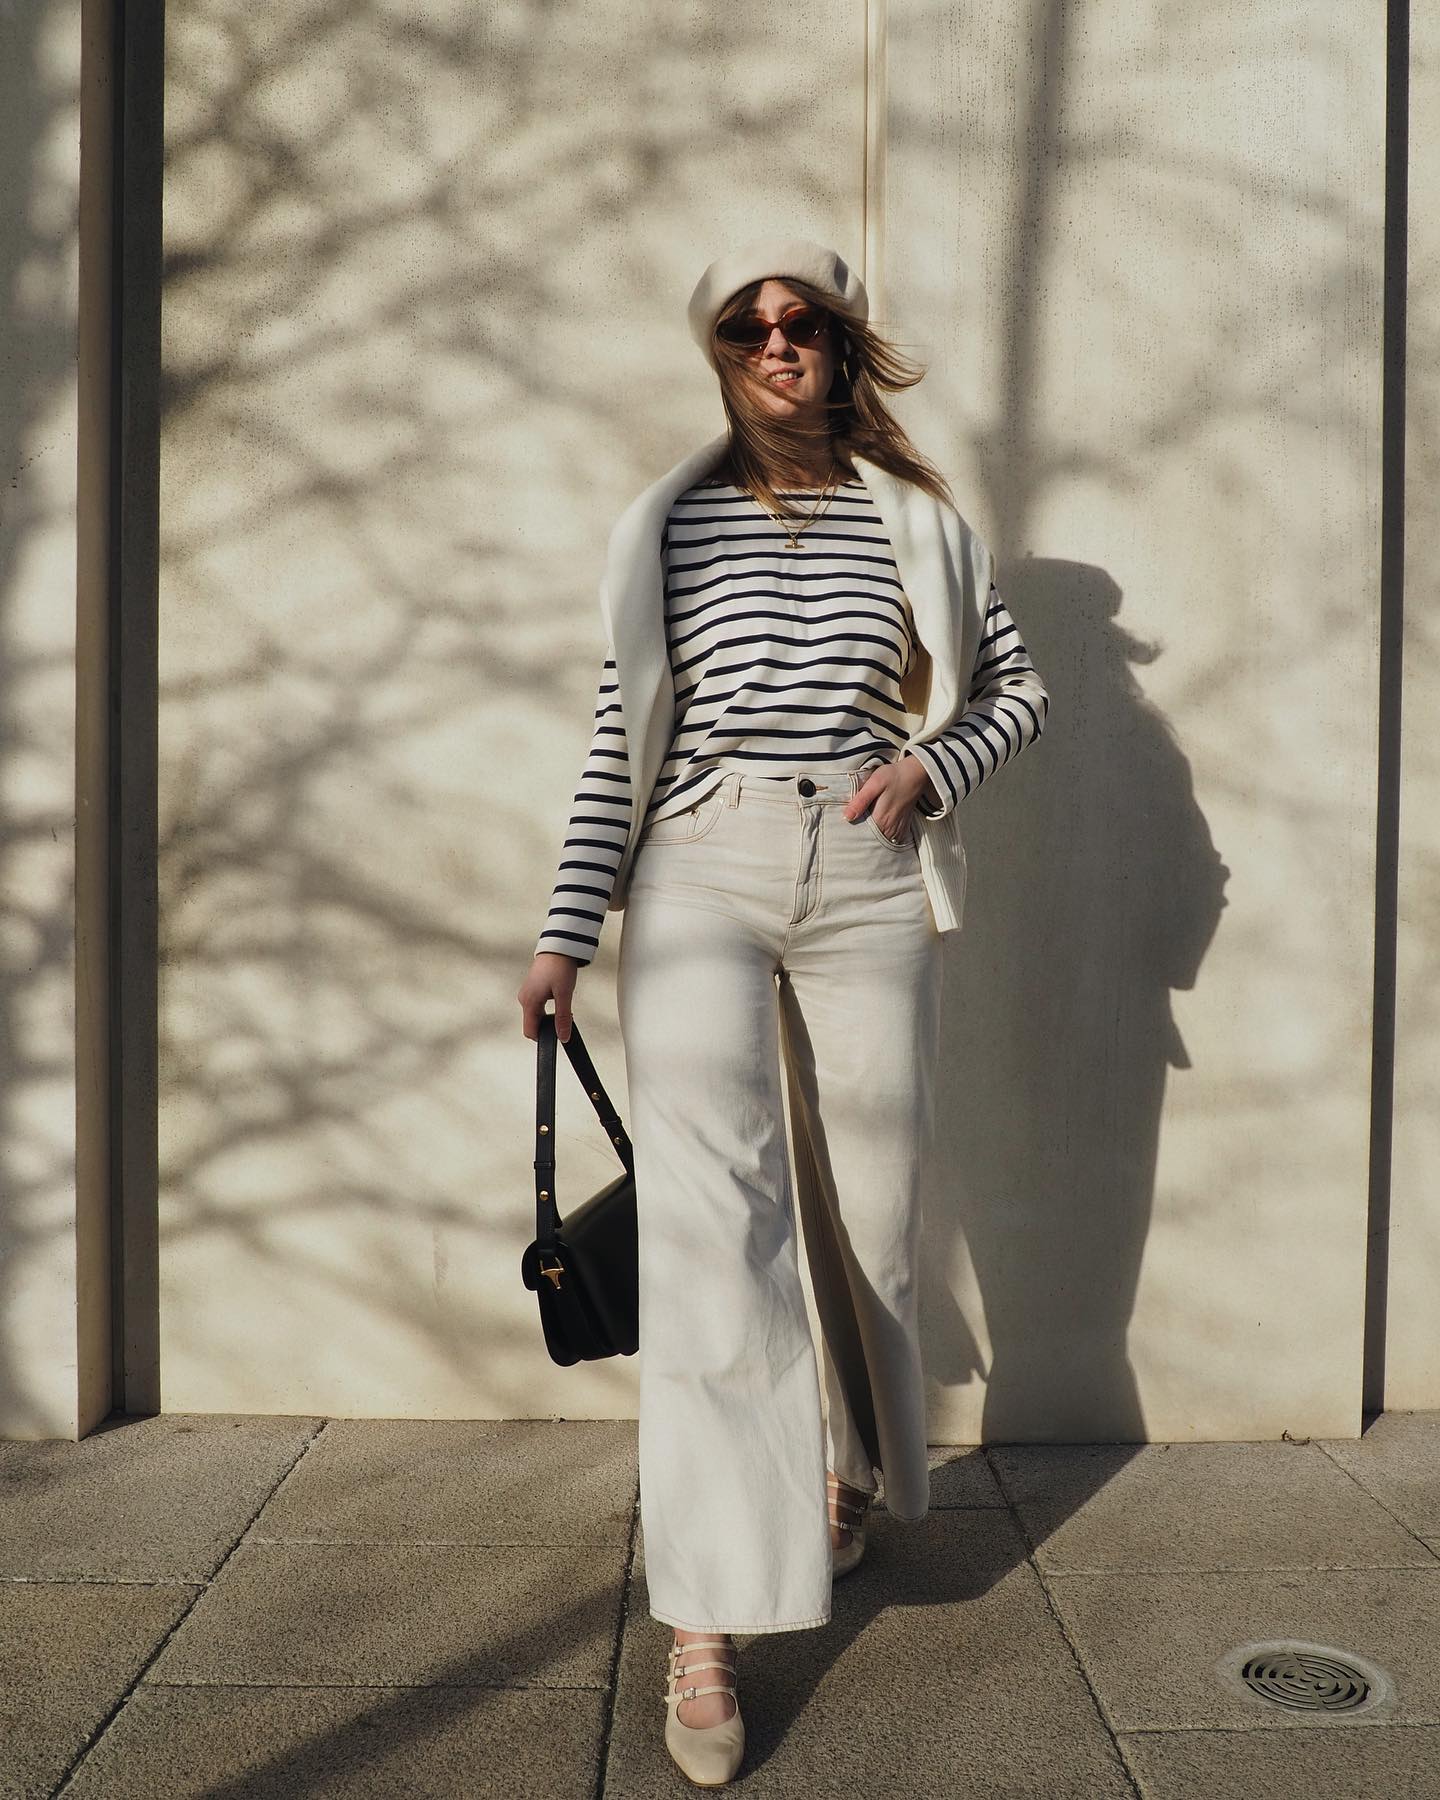 Rachael wearing Breton top with beret and white jeans